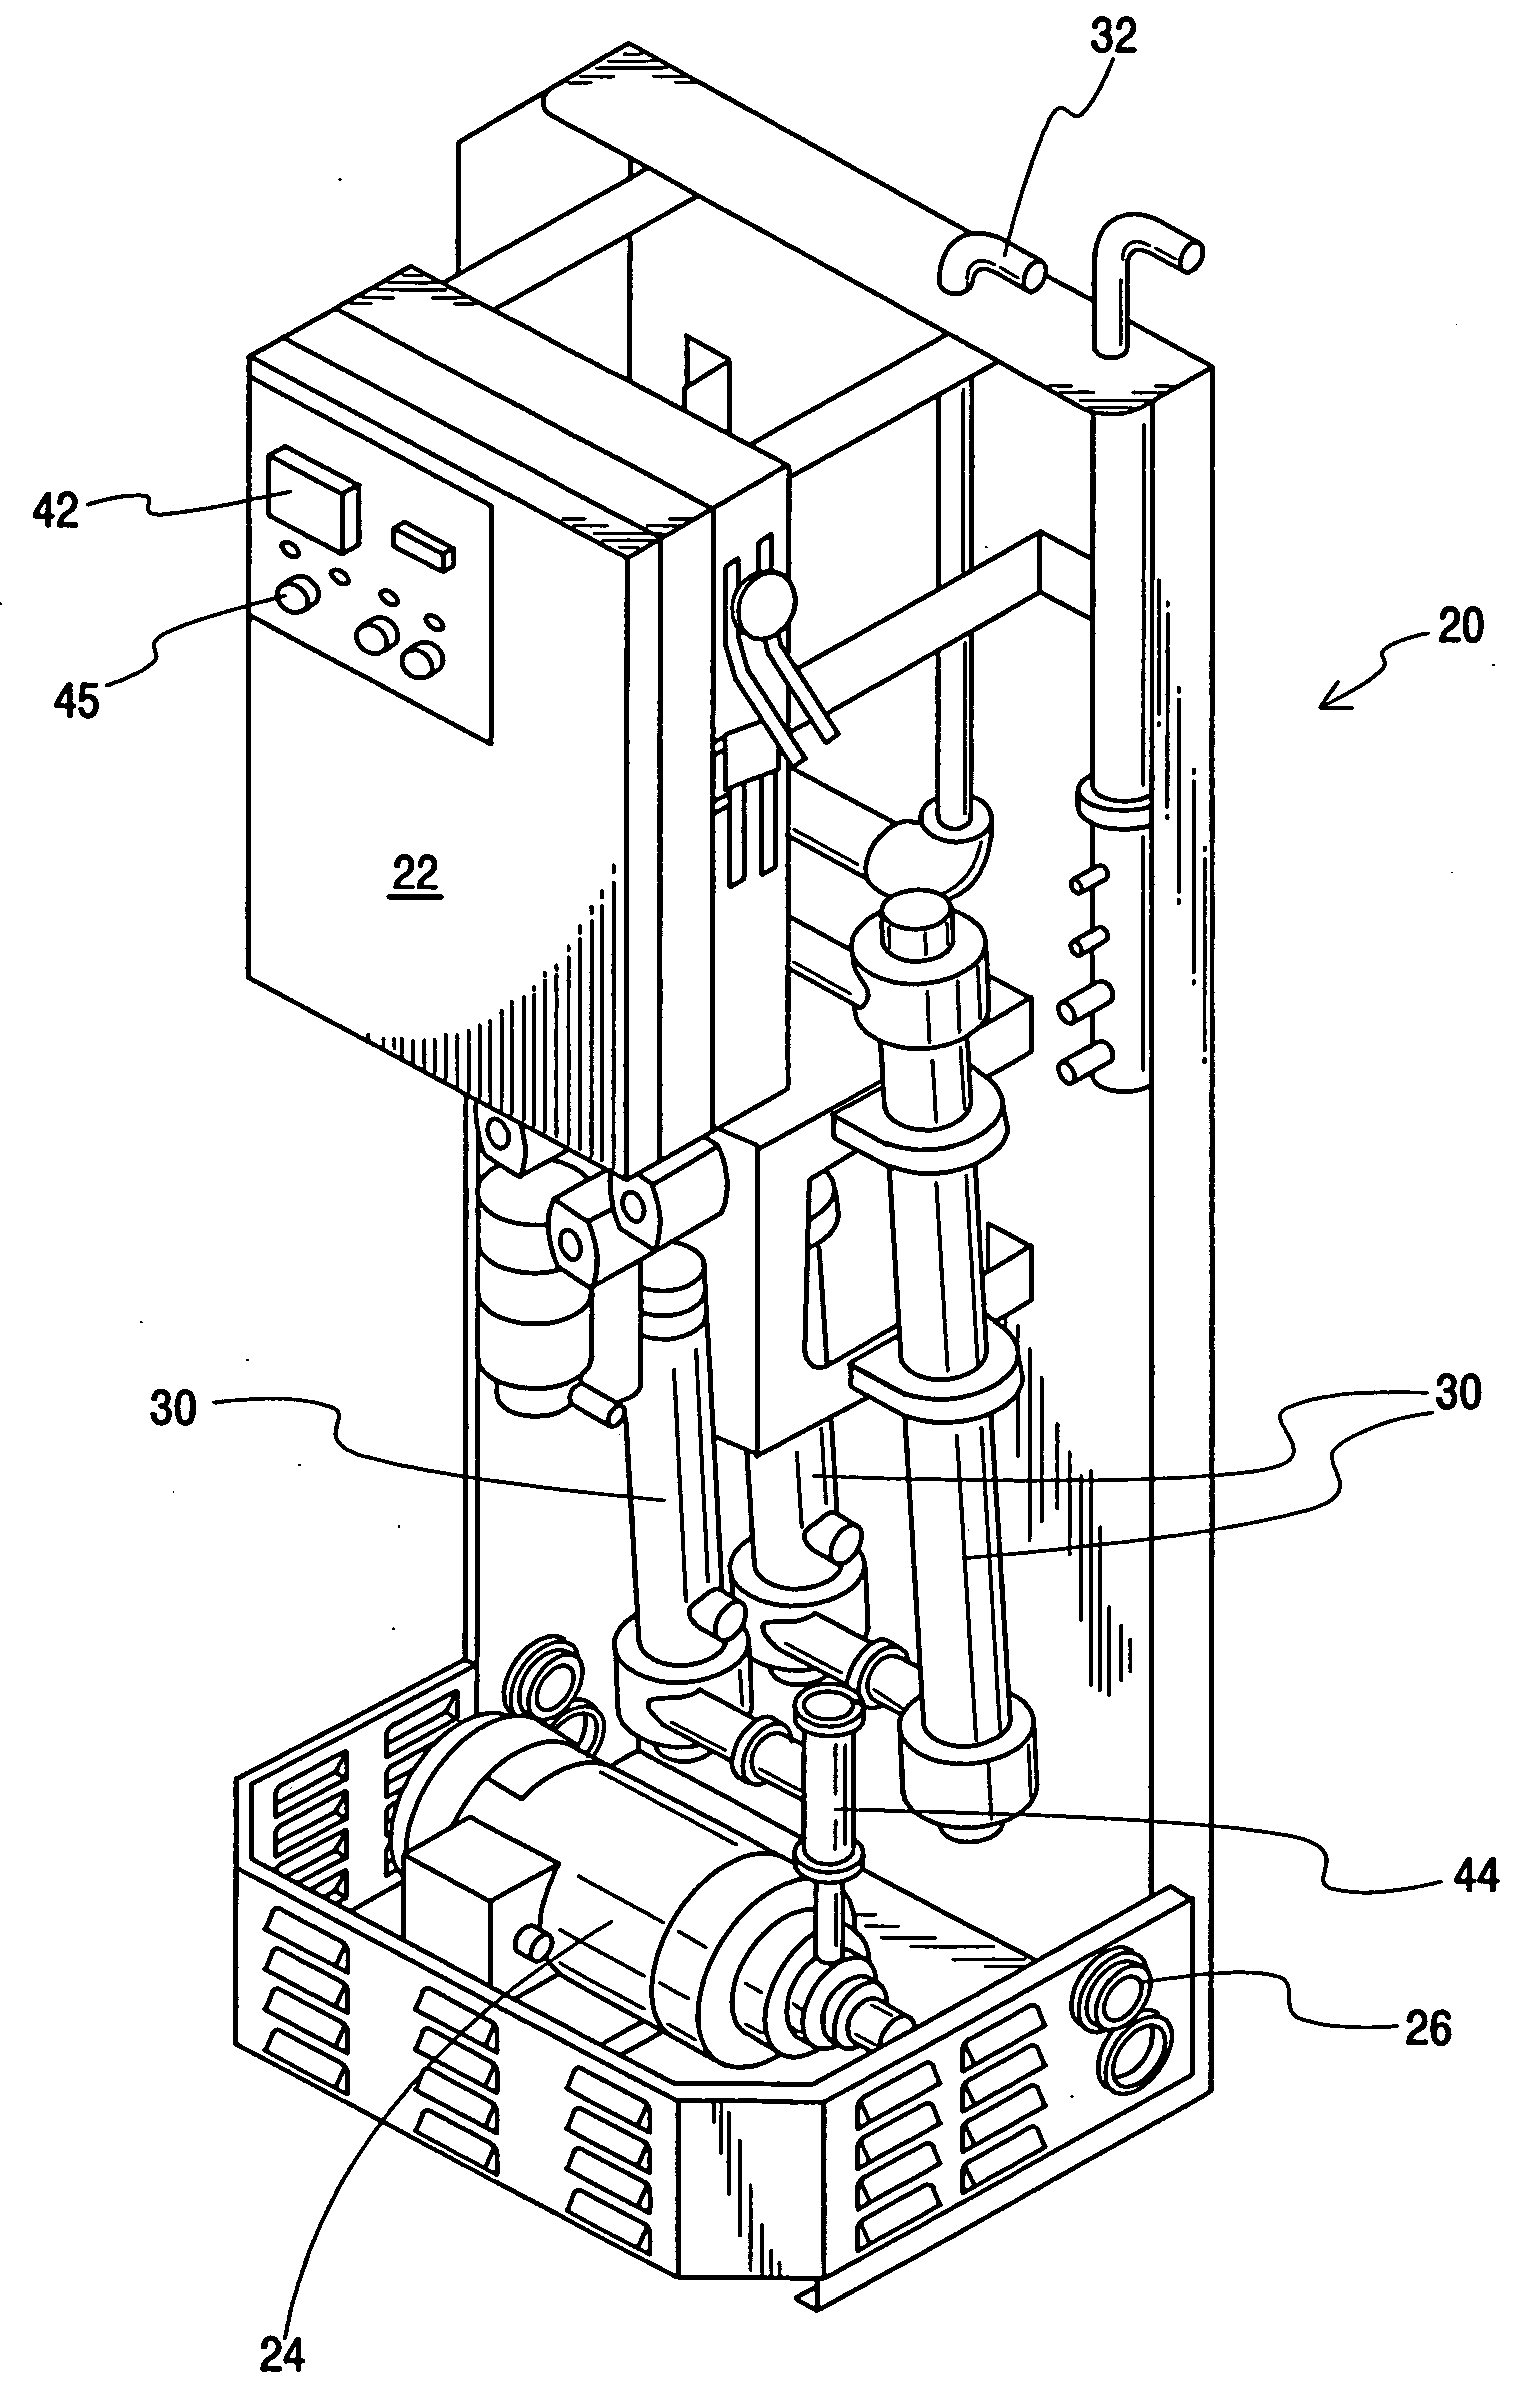 Apparatus and method for pasteurizing milk for feeding to calves